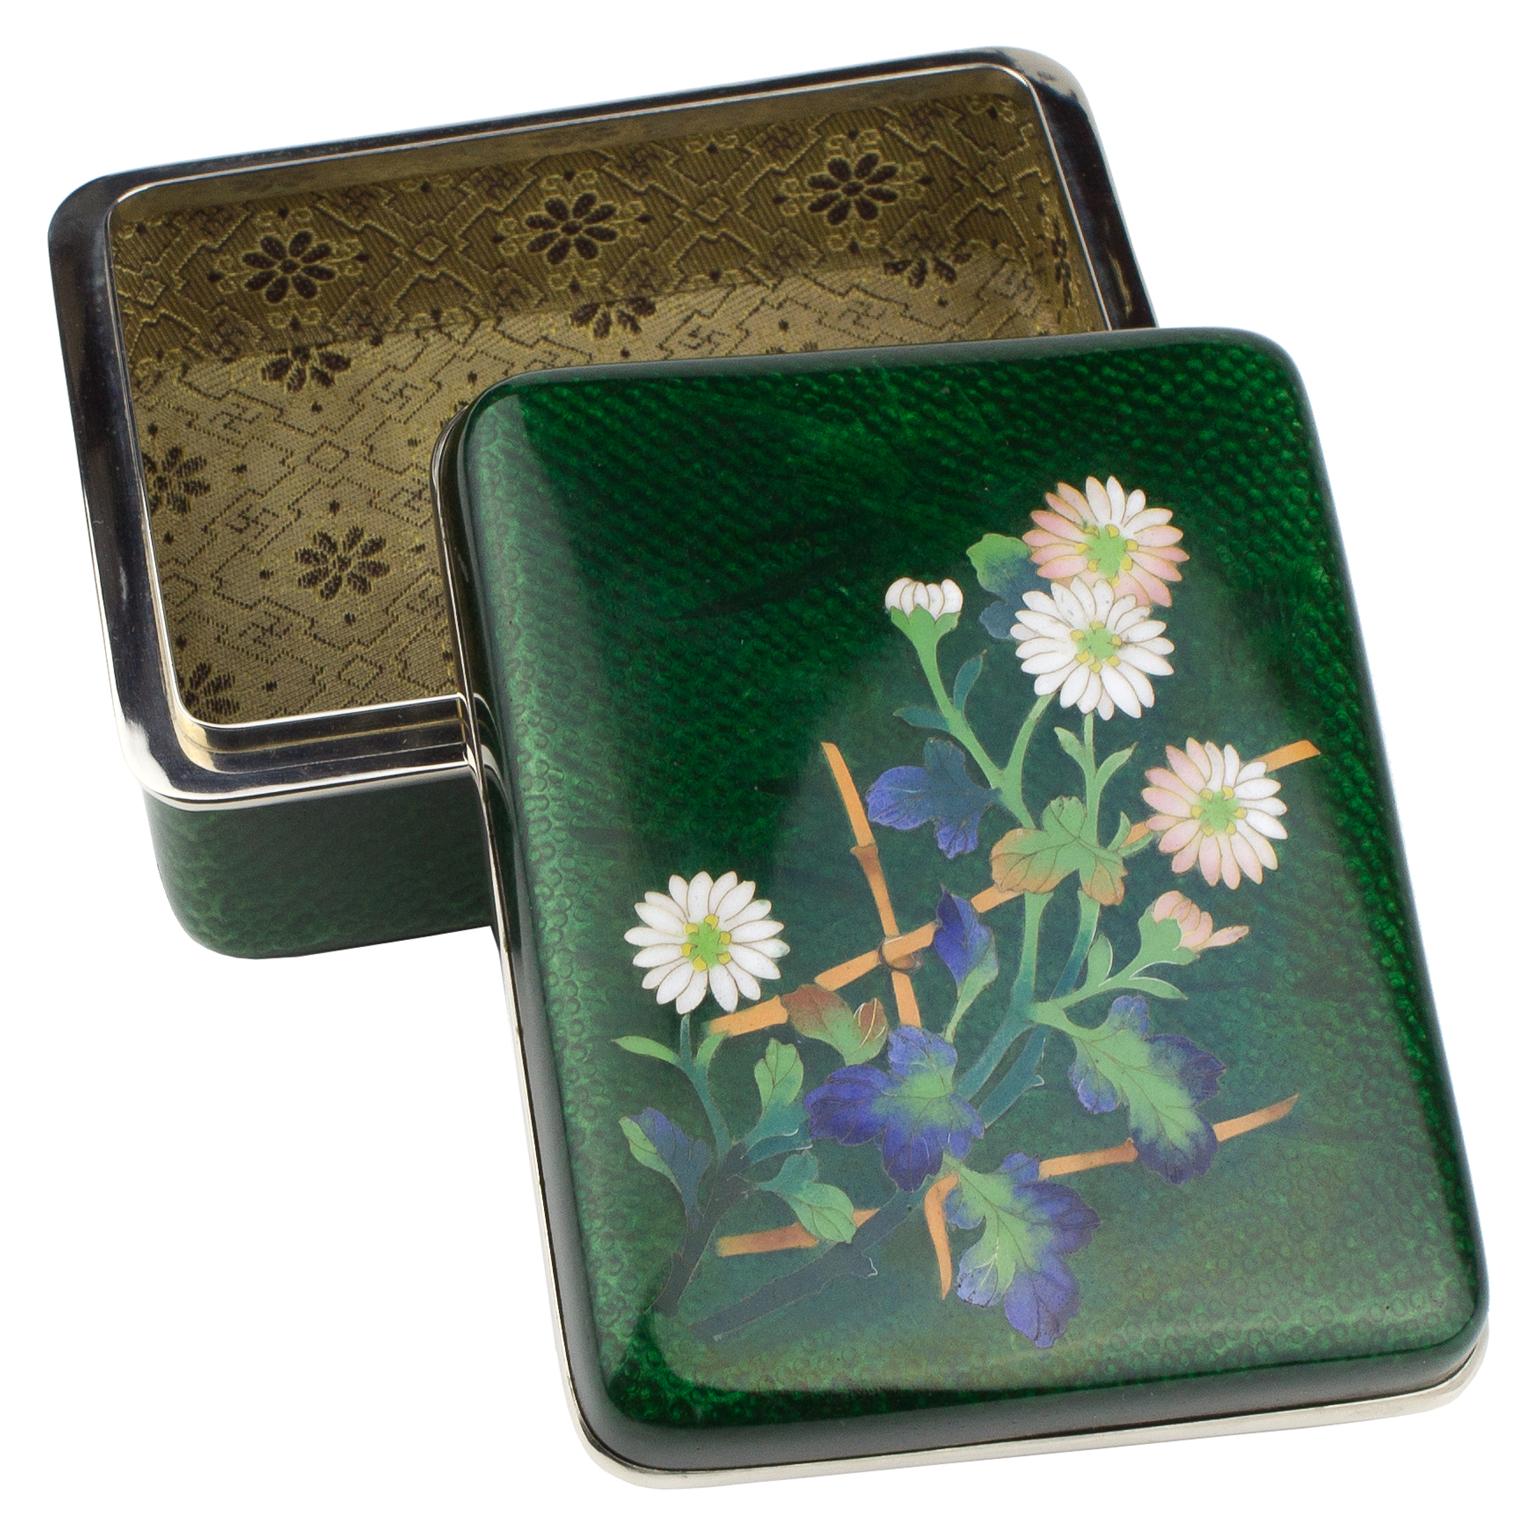 Japanese box in silver decorated with green cloisonné enamel and flower motifs, from the early 20th century.
Dimensions: 11 x 8.7 x 4.3 cm (4.33 x 3.43 x 1.69 in)